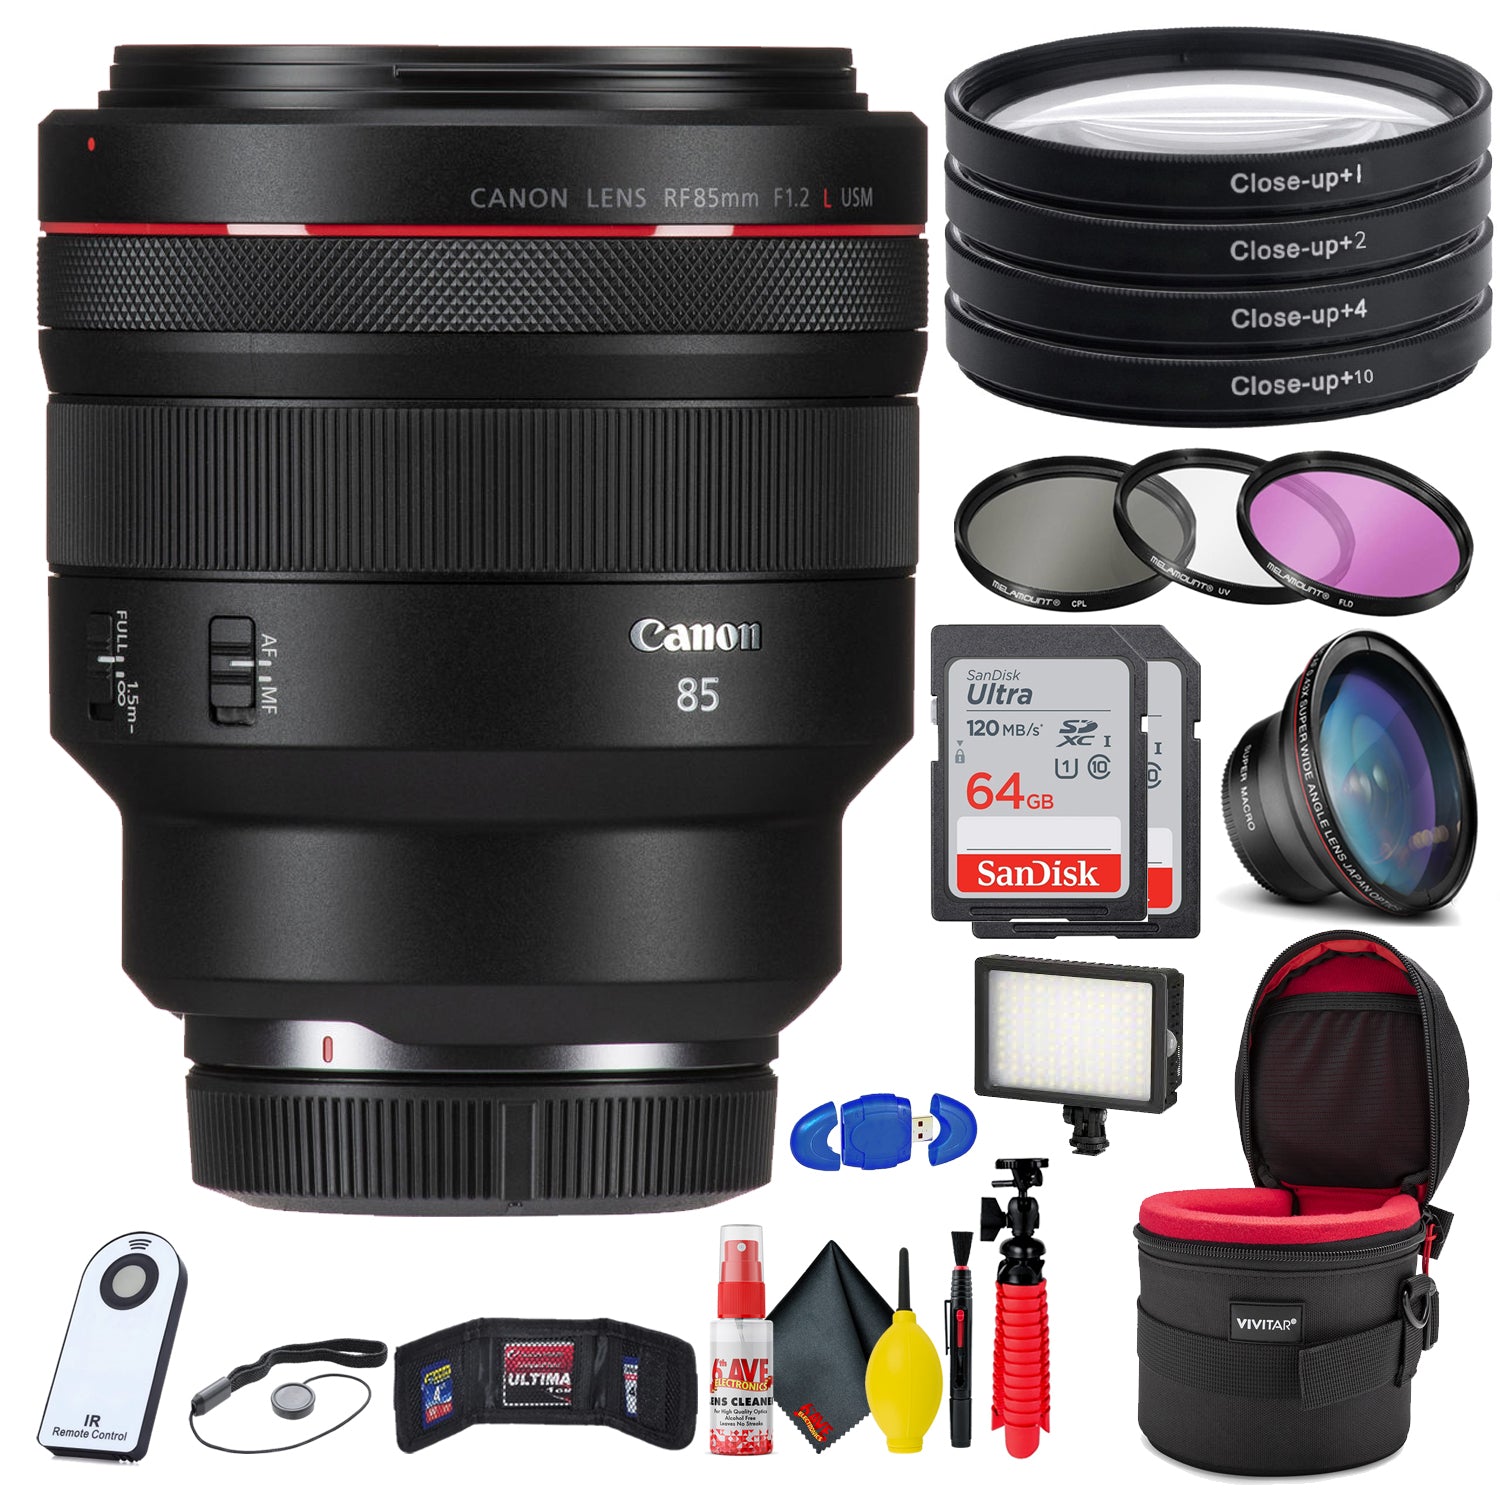 Canon RF 85mm f/1.2L USM Lens Bundle with 2 64GB SD Cards